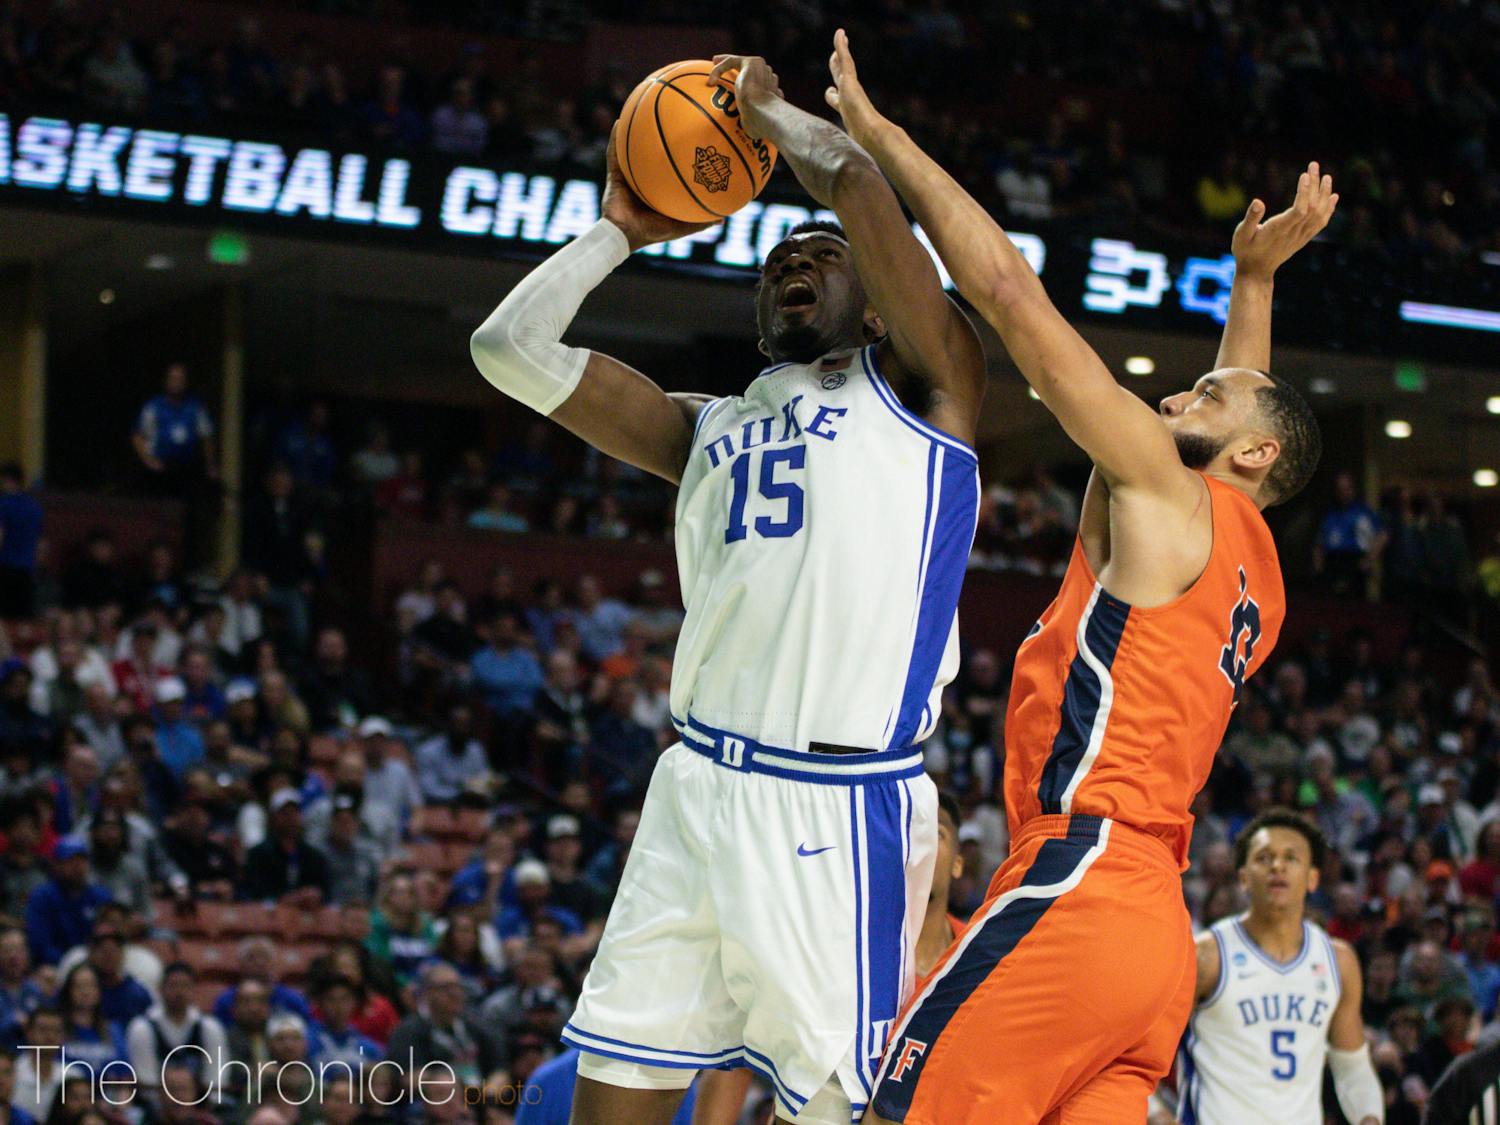 Mark Williams tallied a career-high five assists in Duke's first-round NCAA tournament win.